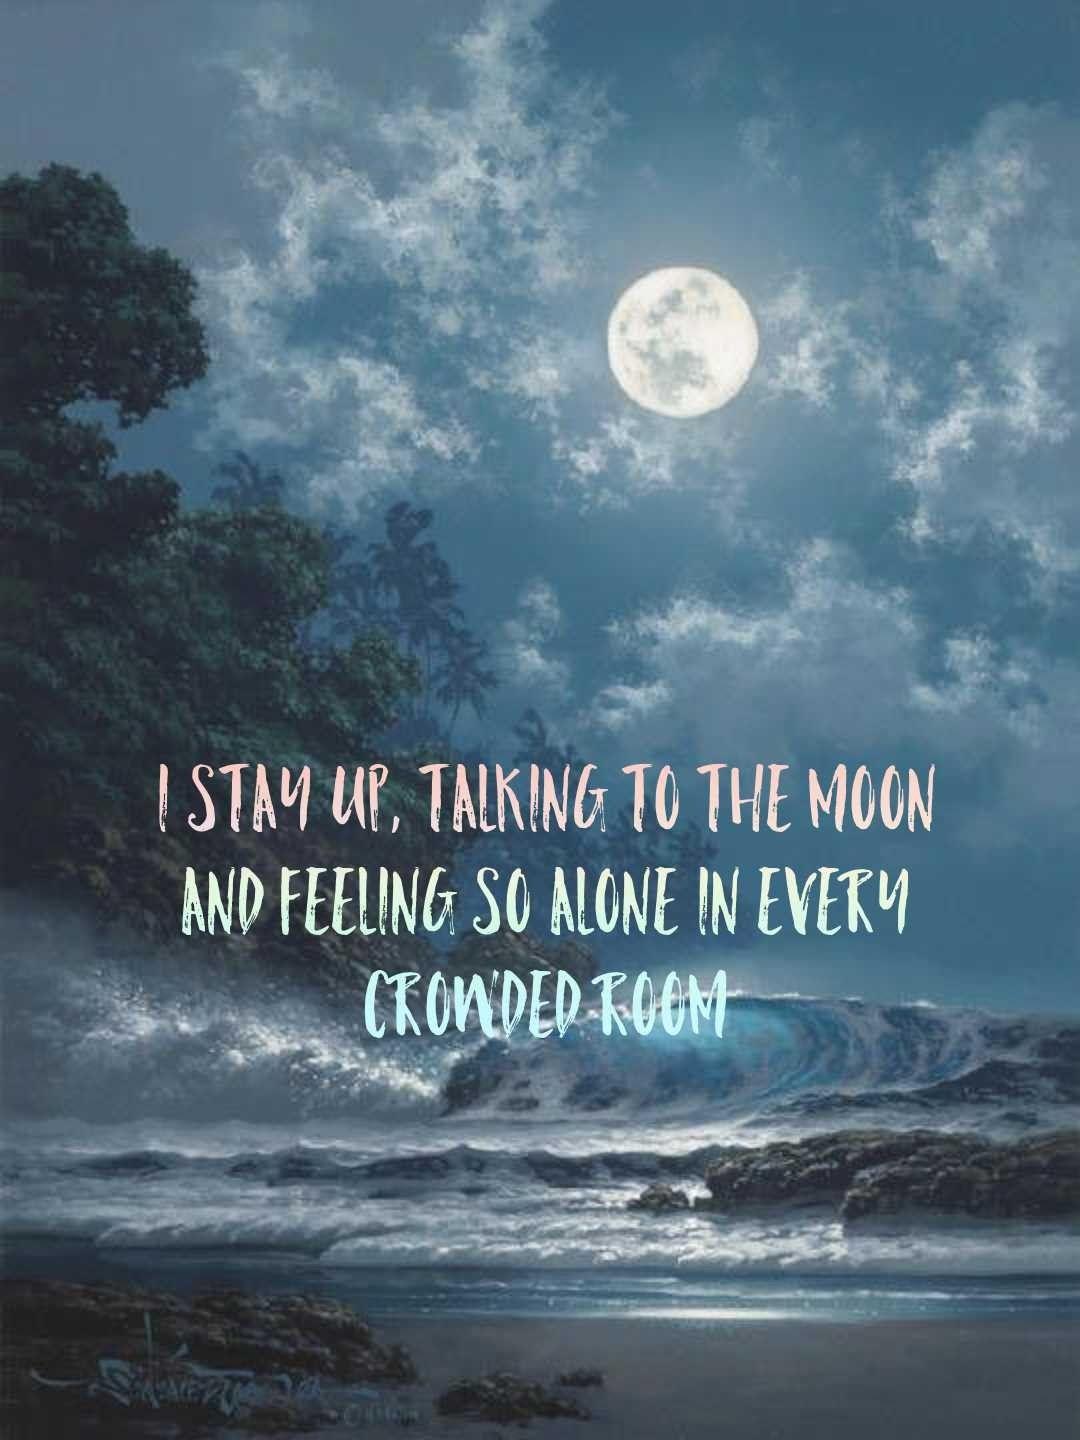 I stay up, talking to the moon and feeling so alone in every crowded room. Real friends lyrics, Real friends, Song quotes